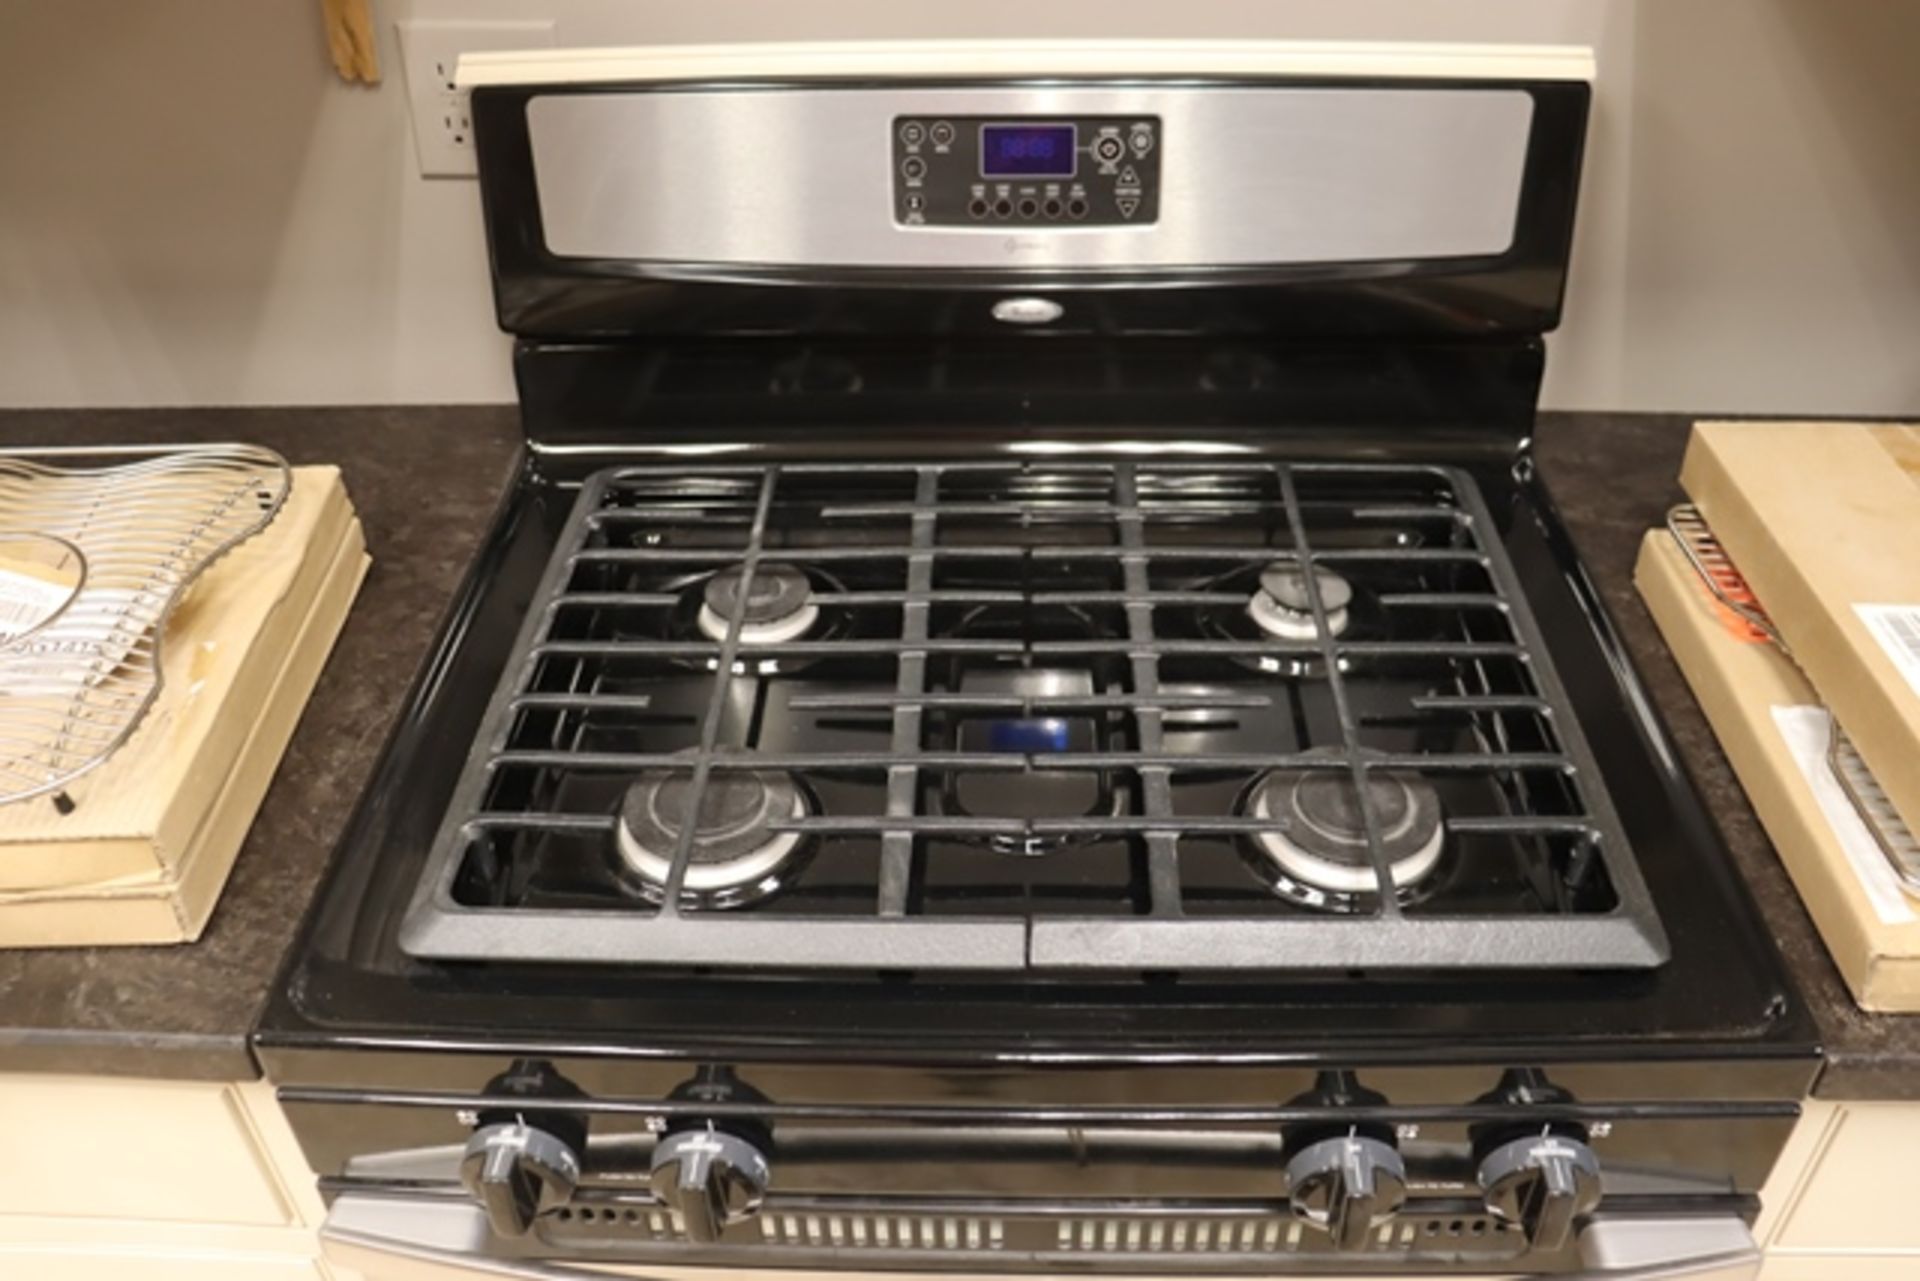 Whirlpool Accubake 30" electric 4 burner stove - New Display only